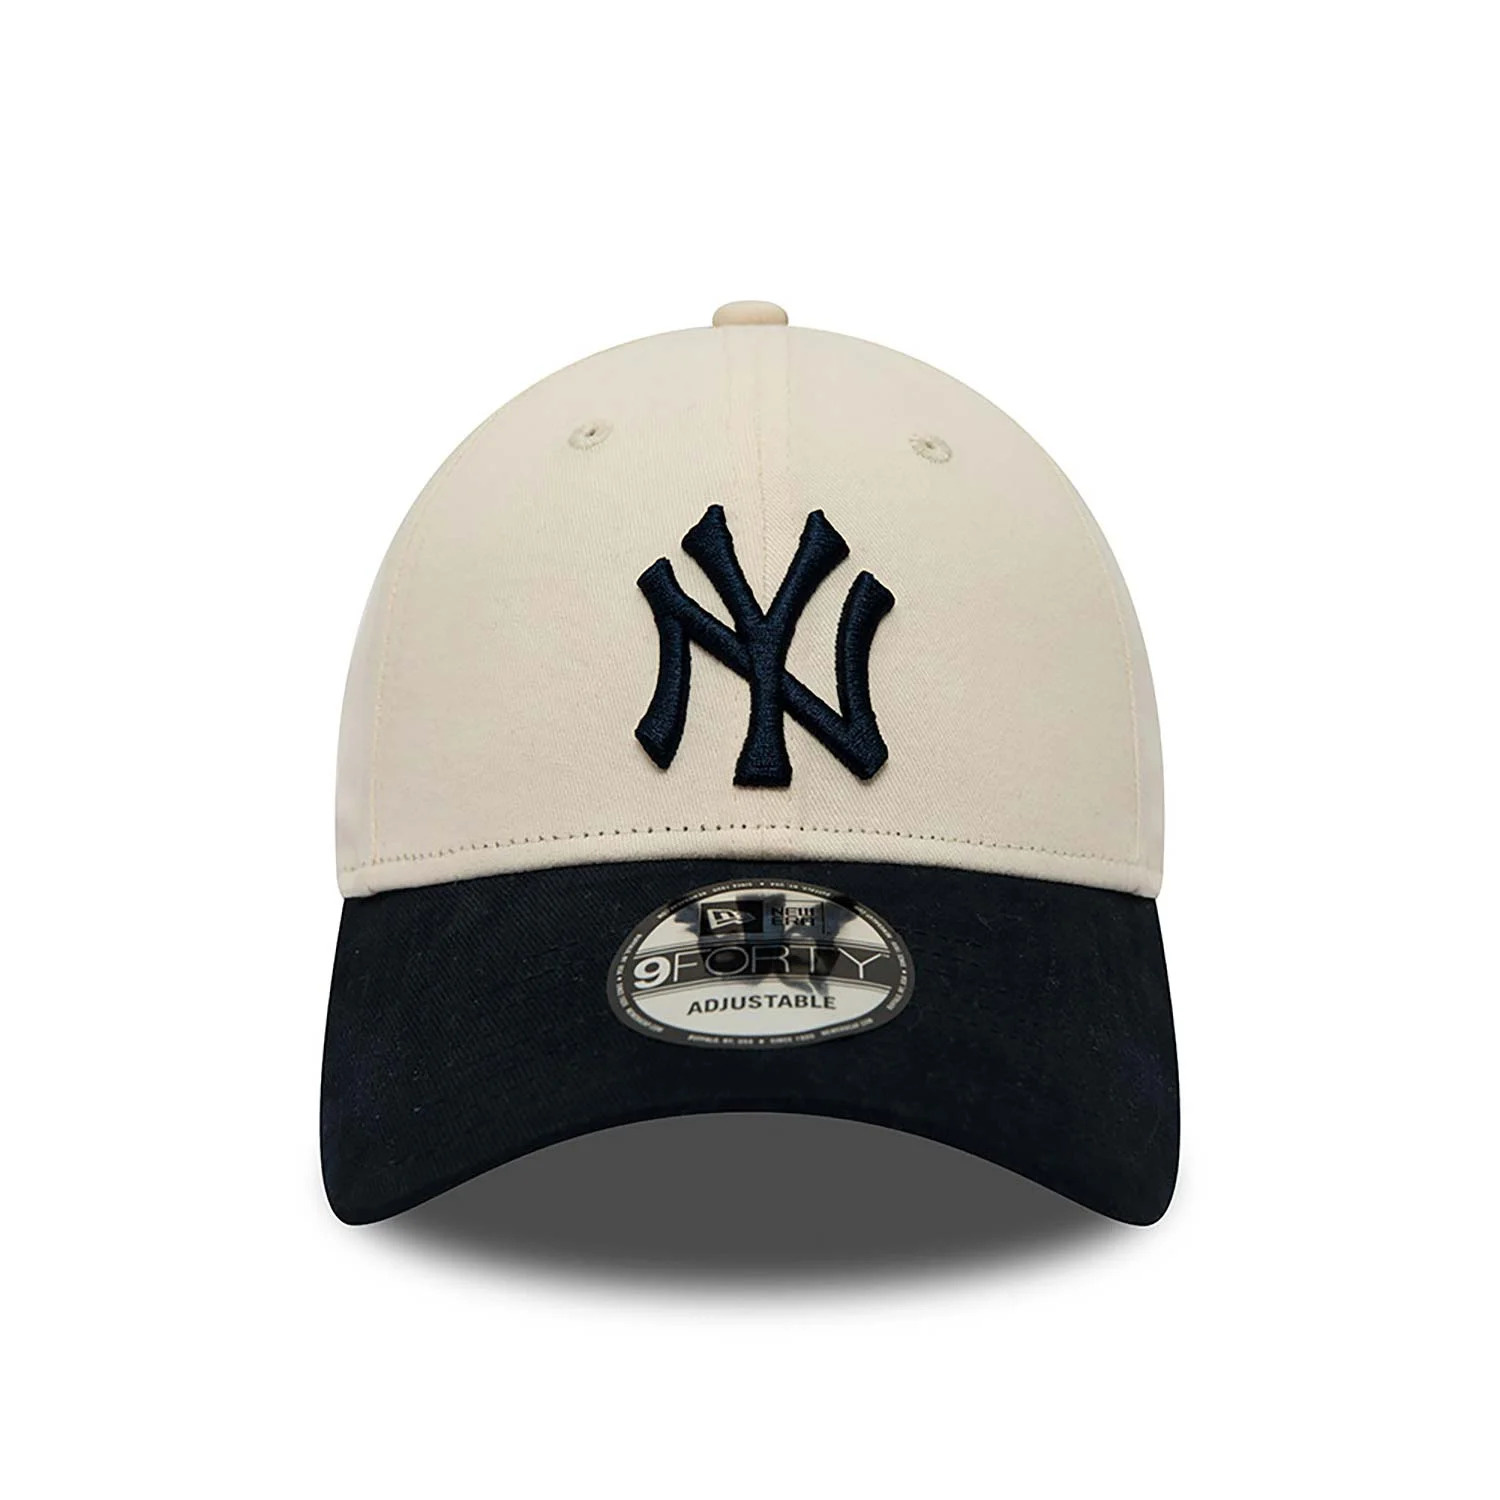 Yankees 9FORTY Adjustable Cap 'Stone' - DEAUP